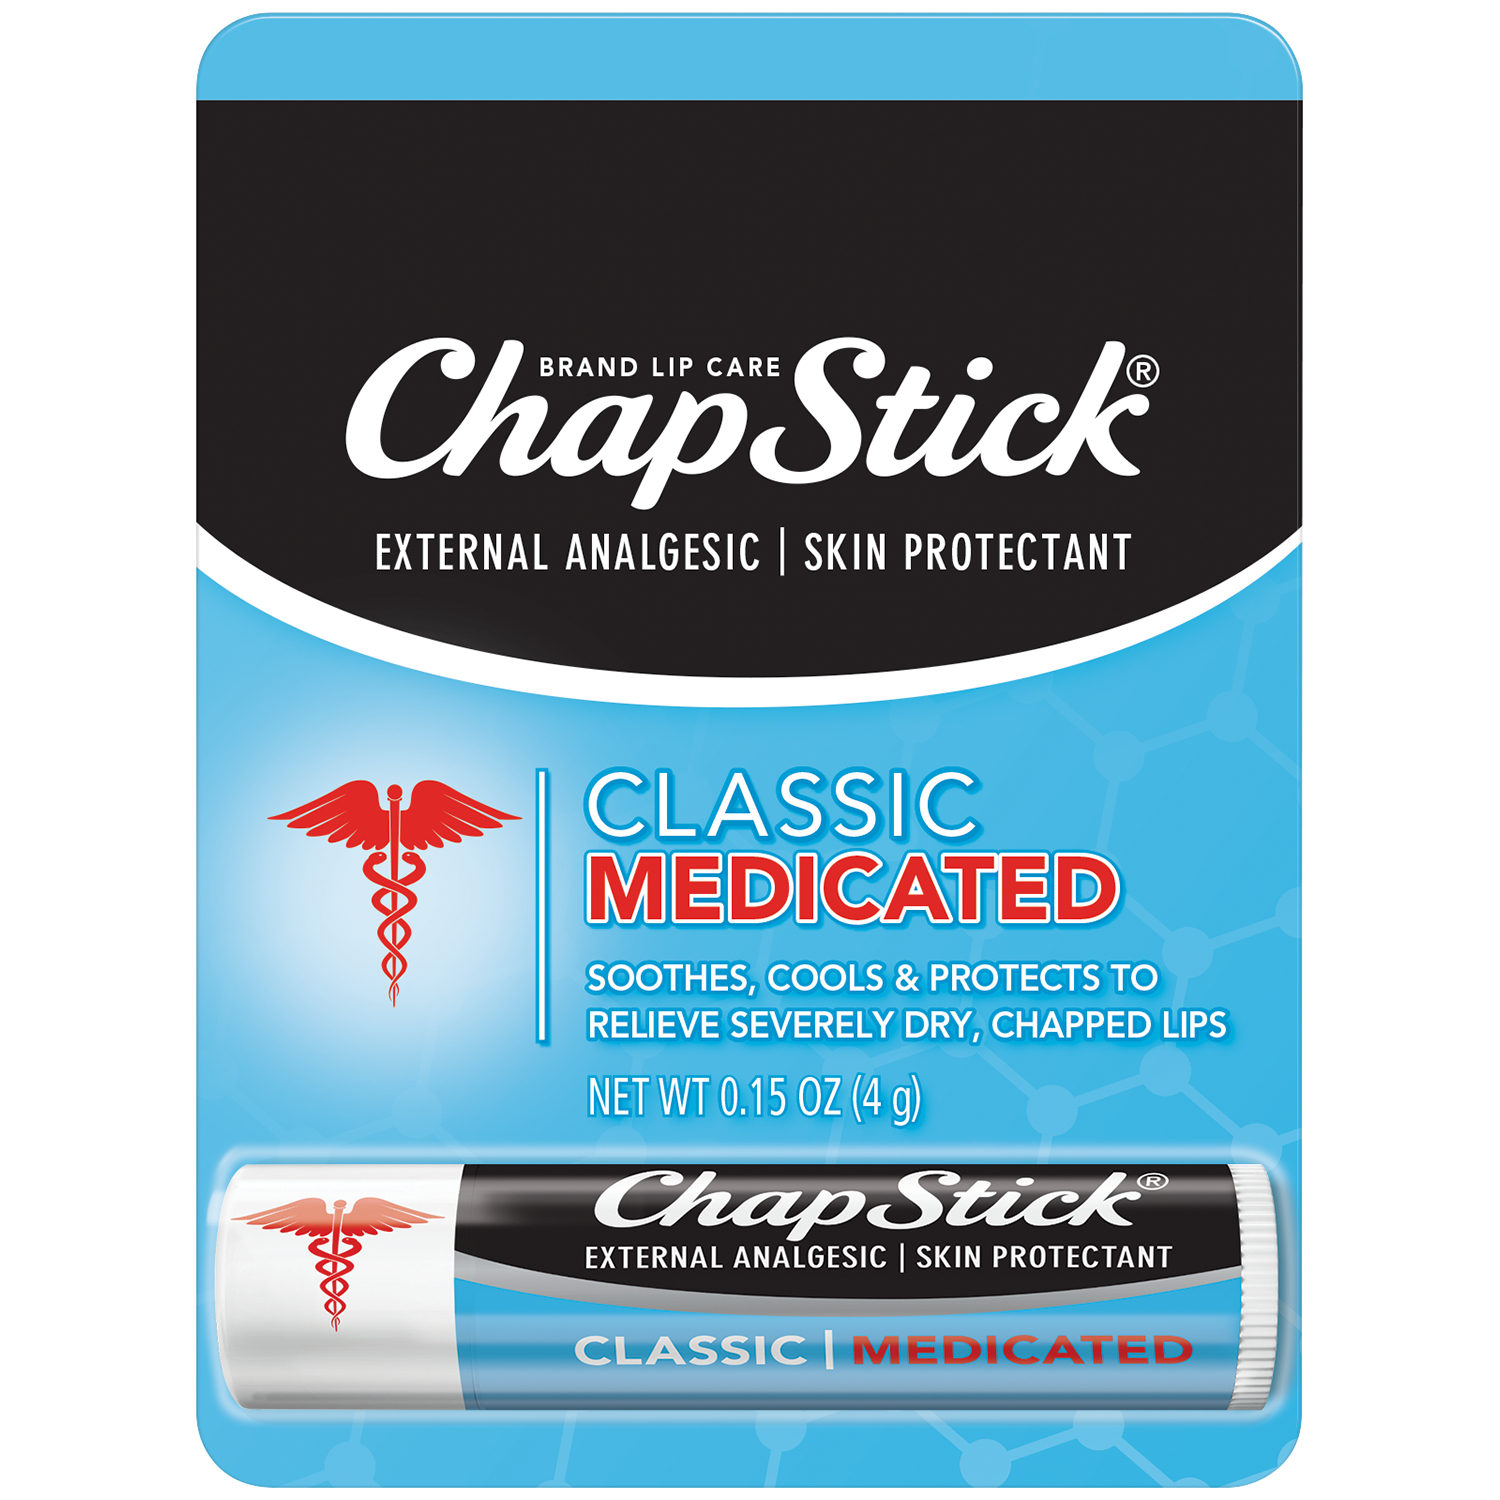 ChapStick Classic Medicated External Skin Protectant Lip Balm Tube, Relieves Chapped Lips